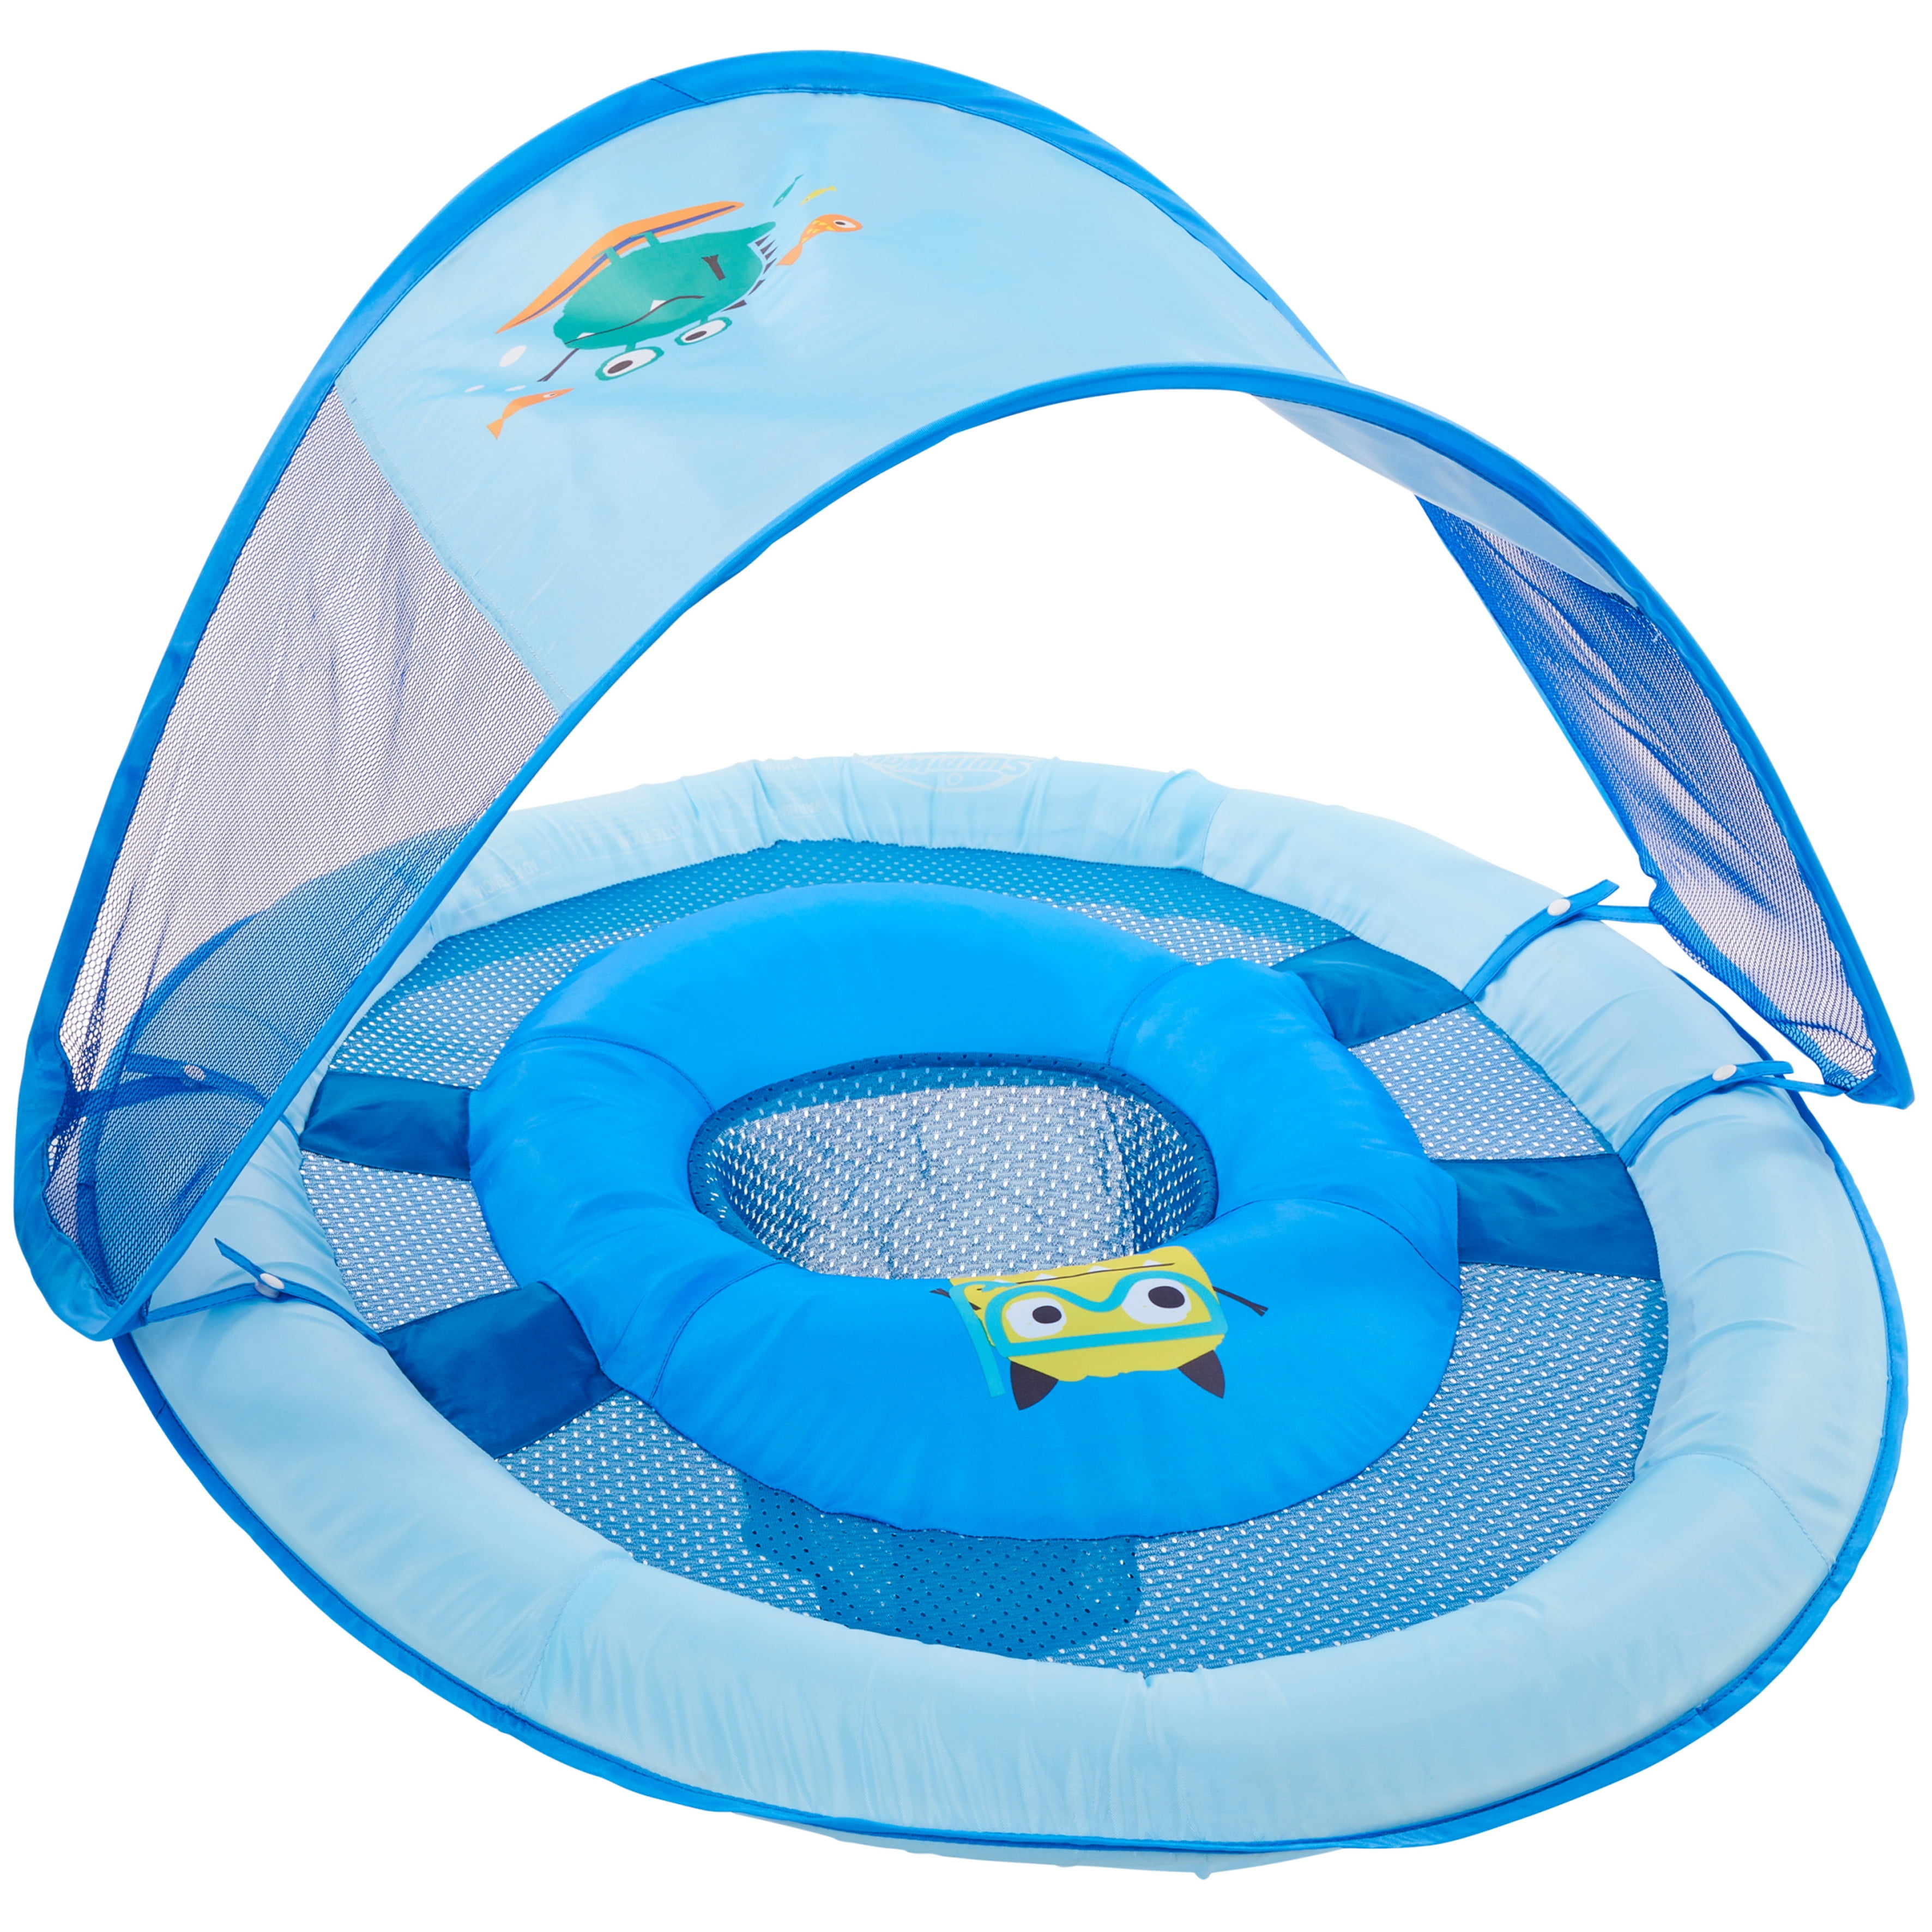 Intex Kiddie Float Baby Toddler Swimming Pool Raft Inflatable Seat W Sunshade X2 for sale online 